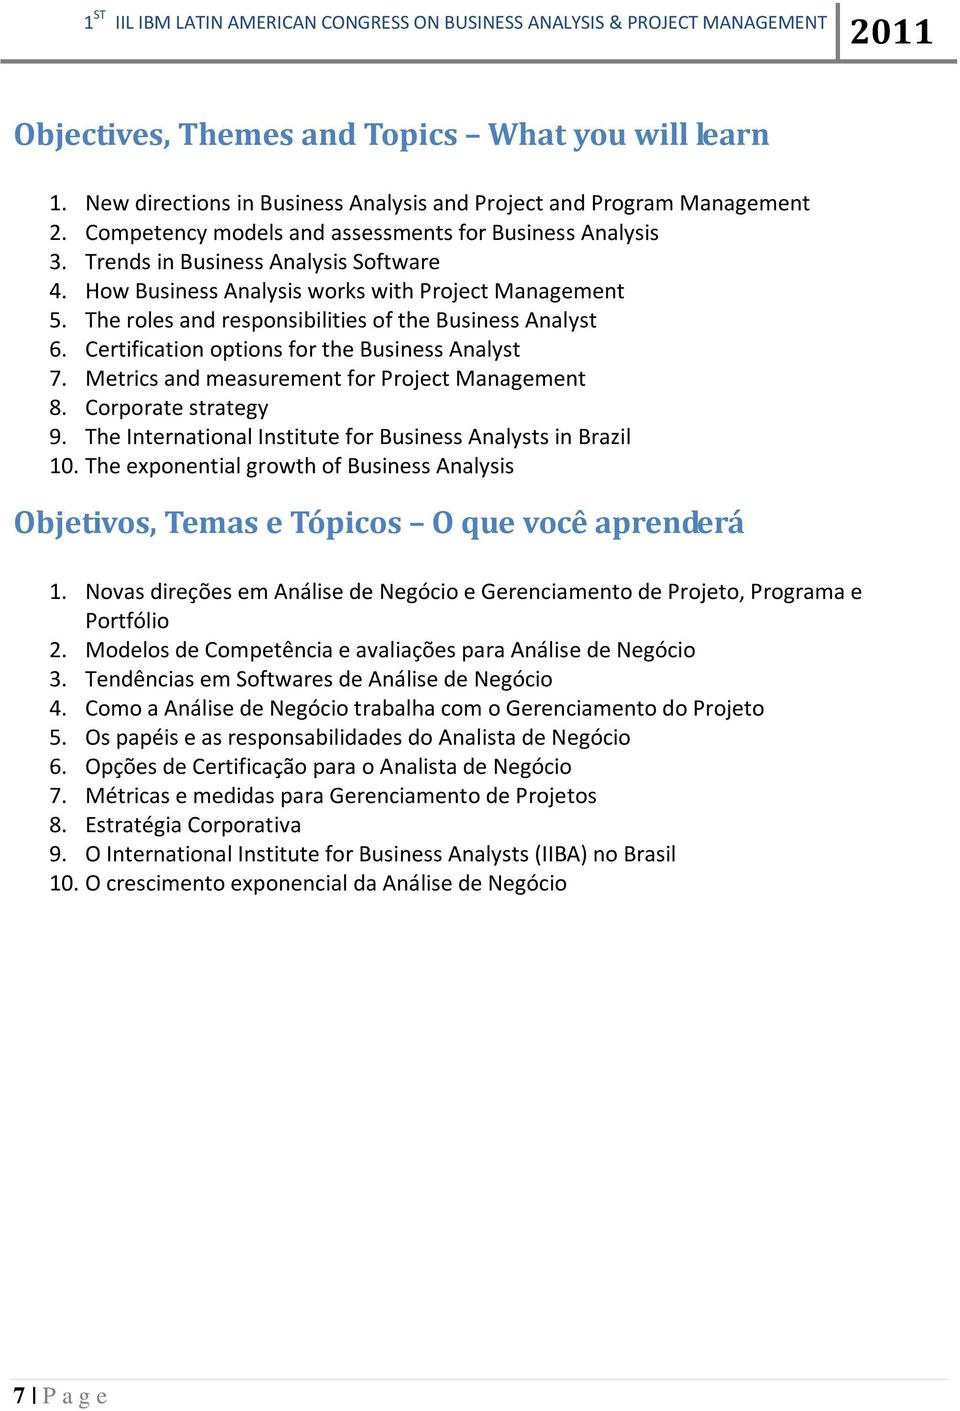 Certification options for the Business Analyst 7. Metrics and measurement for Project Management 8. Corporate strategy 9. The International Institute for Business Analysts in Brazil 10.